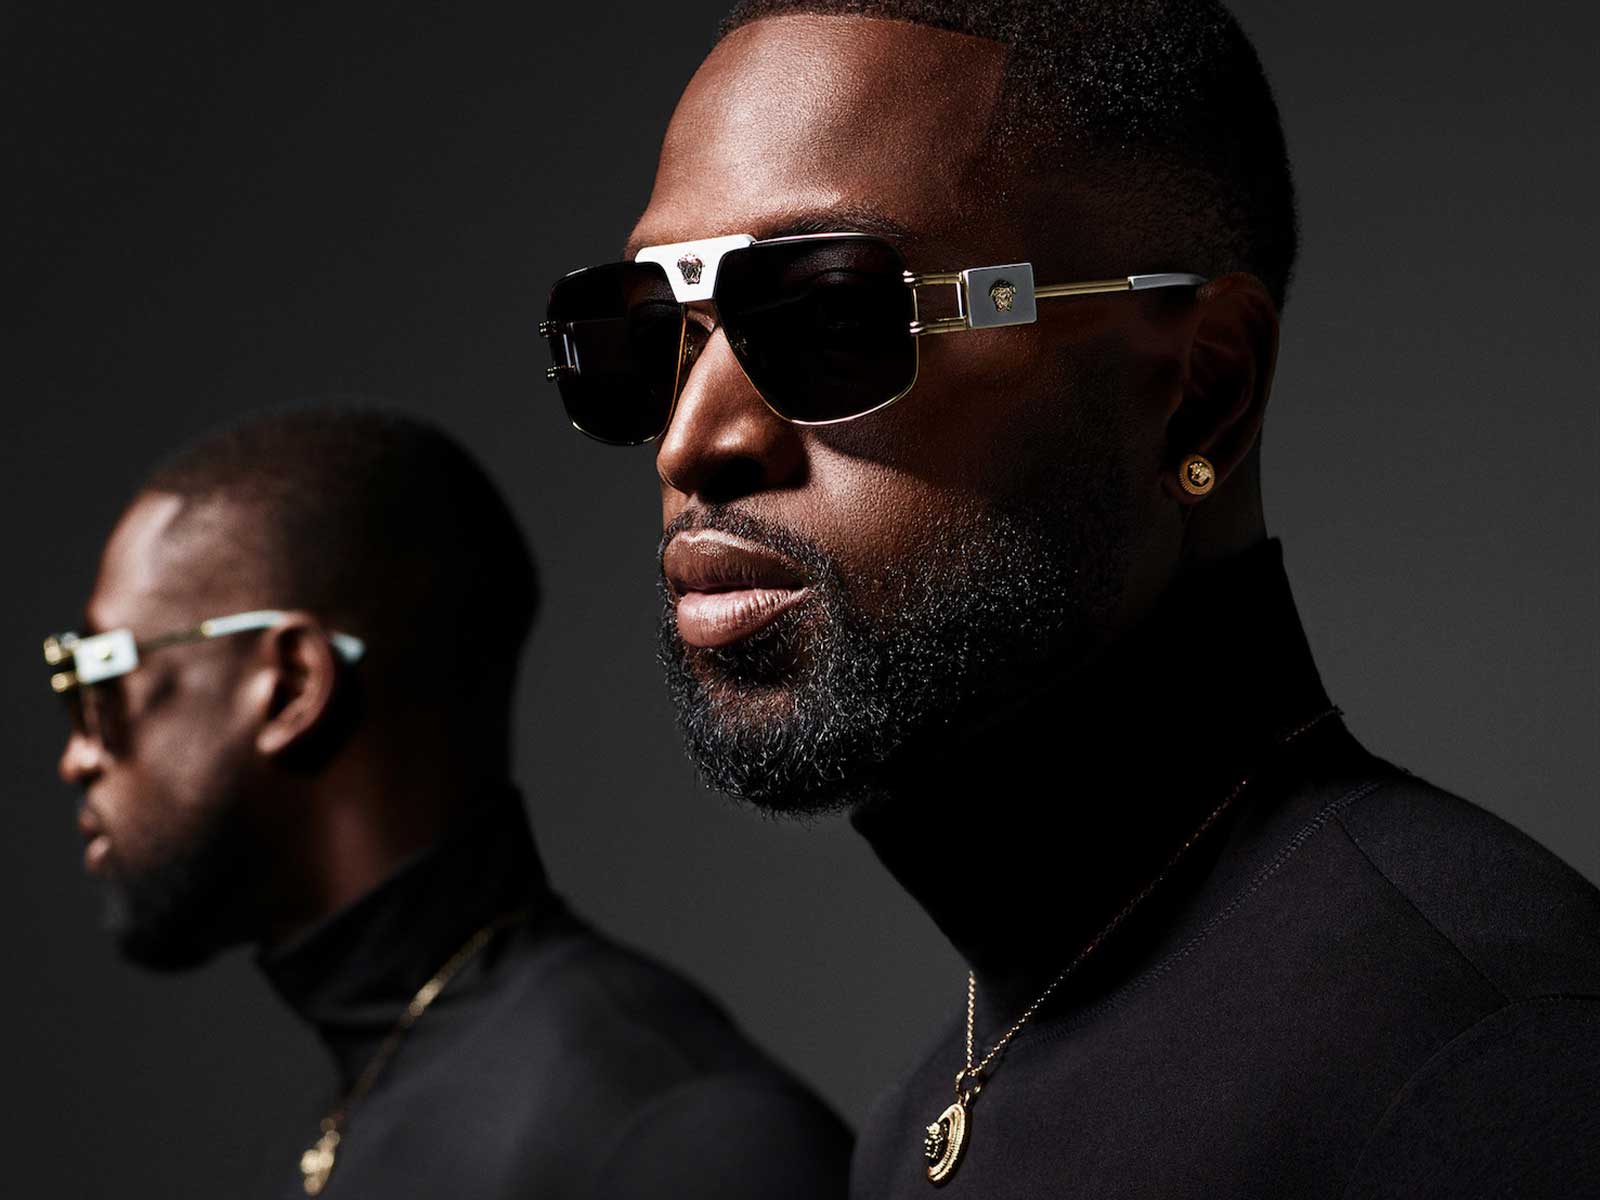 Dwyane Wade poses for Mario Sorrenti in the latest Versace Eyewear campaign